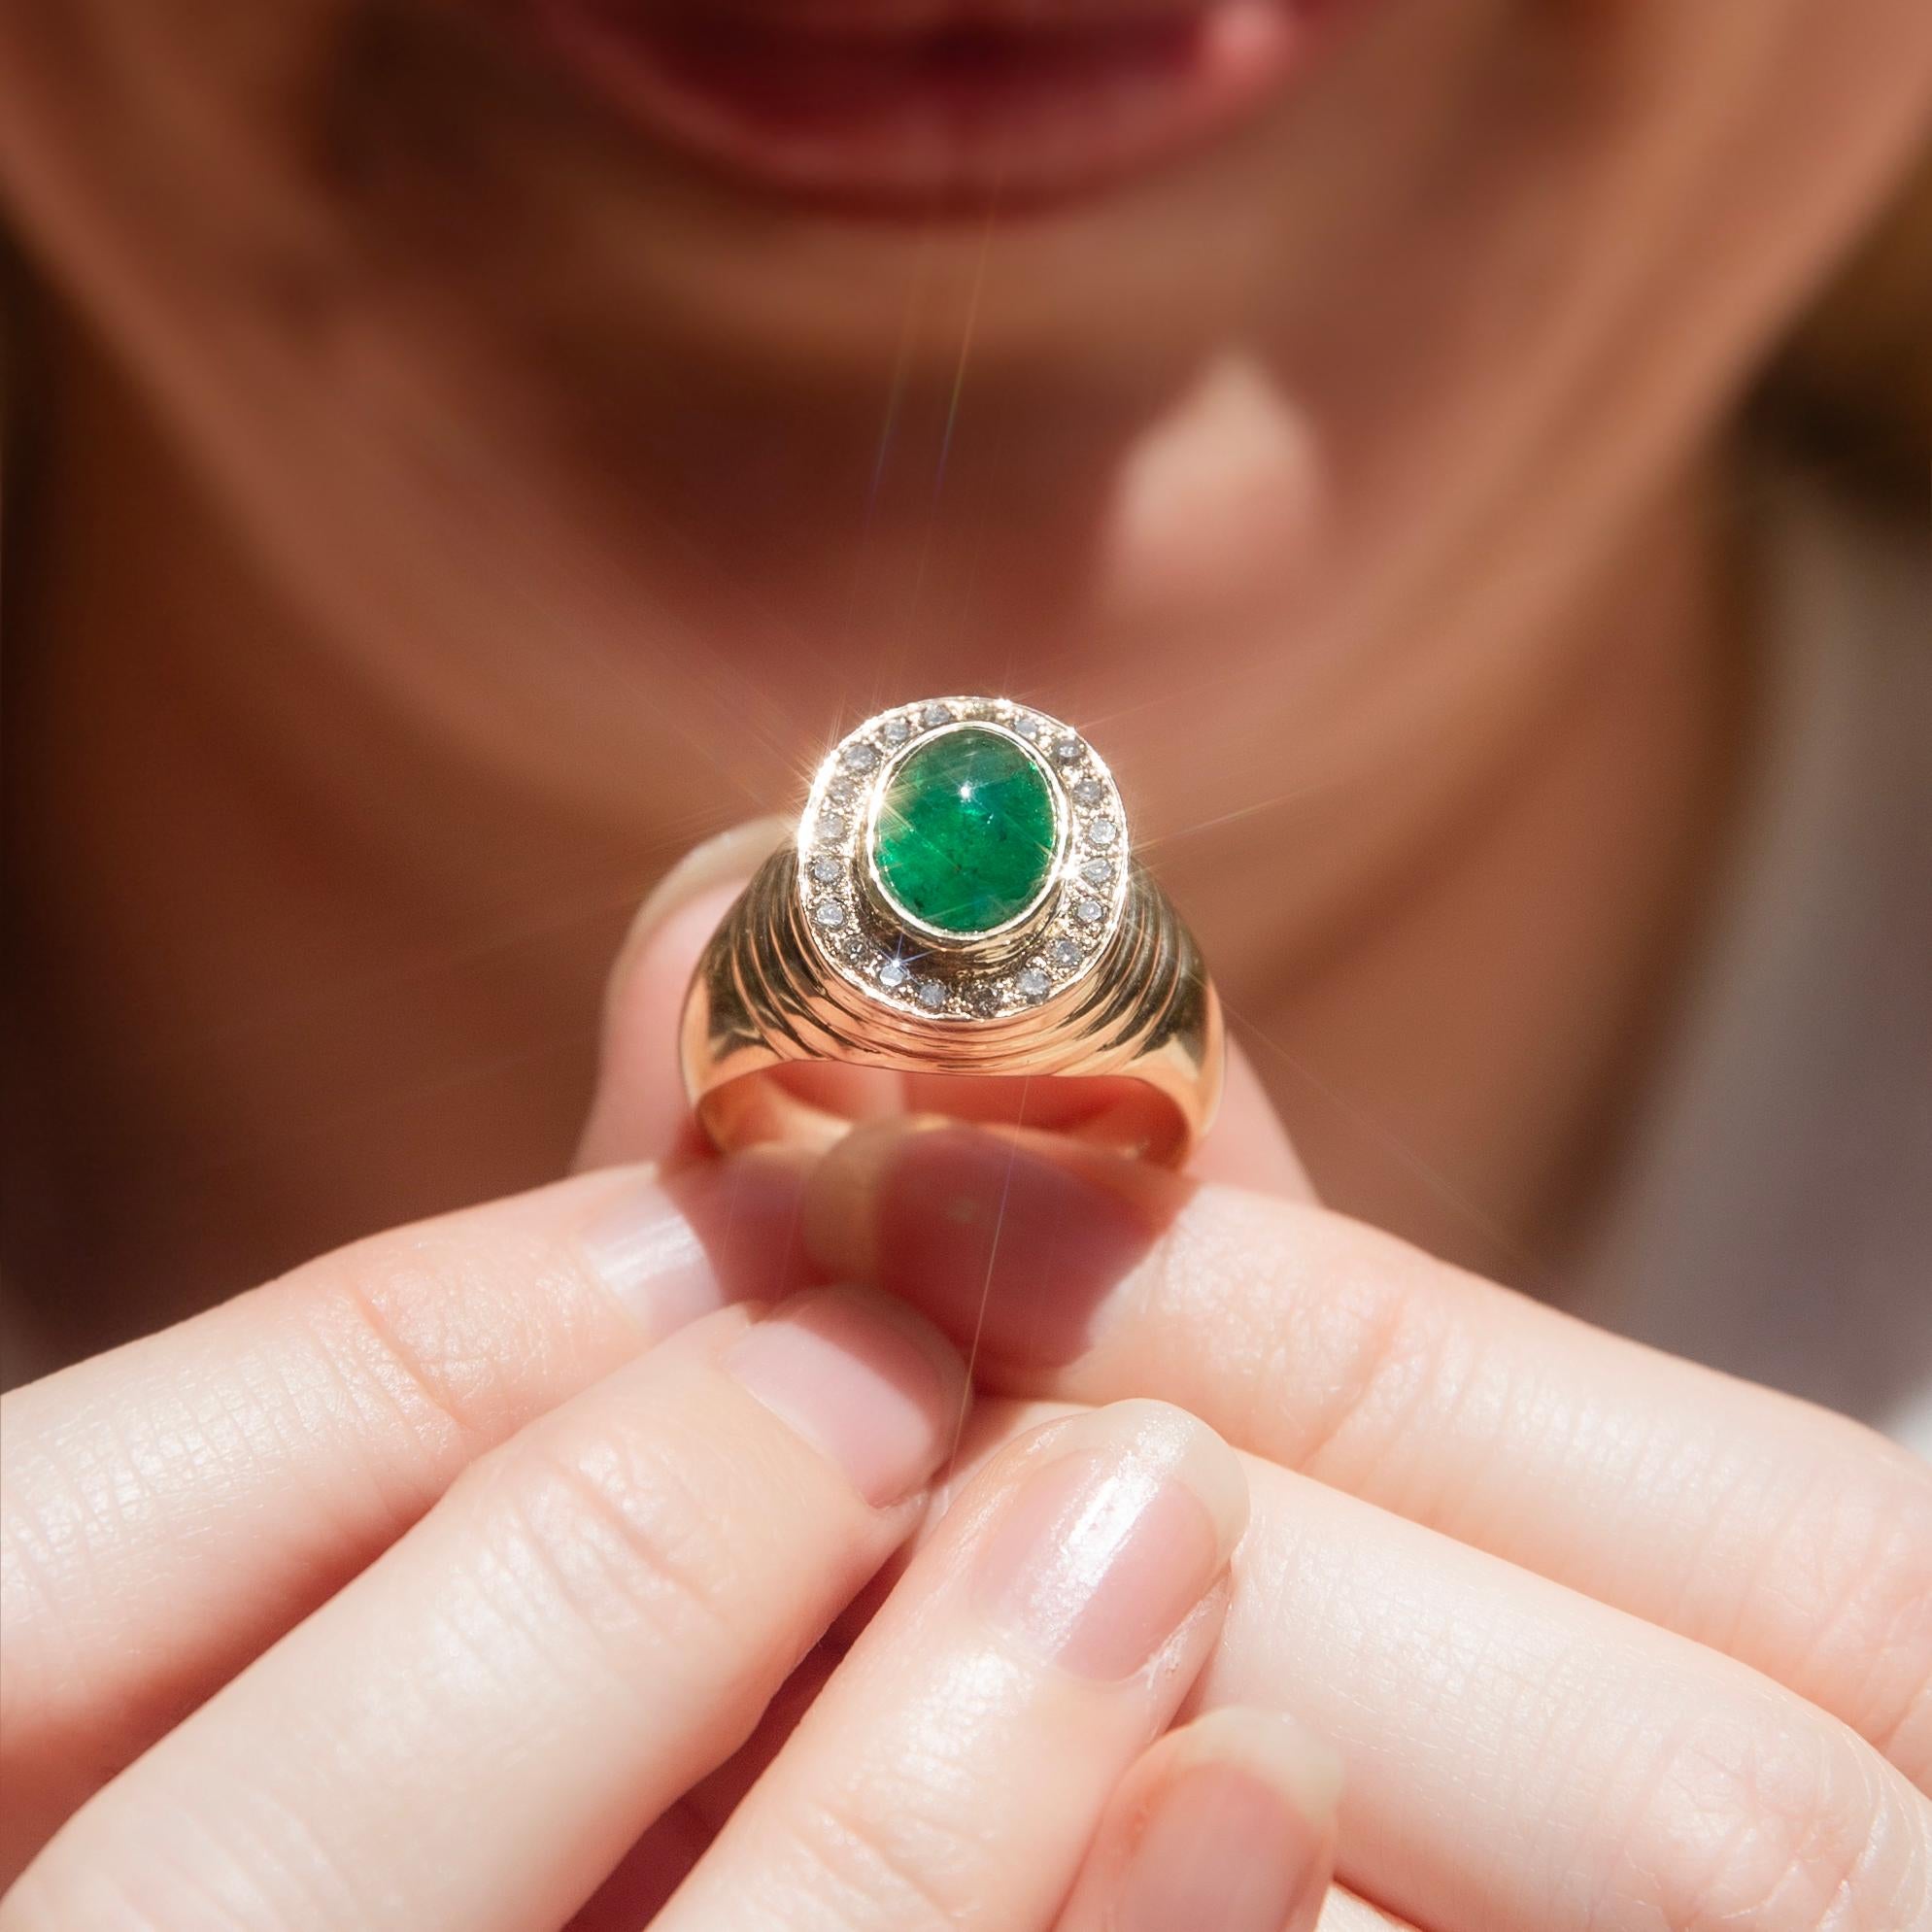 Crafted in 18 carat gold, The Sade Ring takes you on a journey to the 1970's and its celebration of free love. Her gorgeous cabochon cut emerald sits atop a raised step setting and is enveloped by a row of sparkling diamonds. An adornment to revel